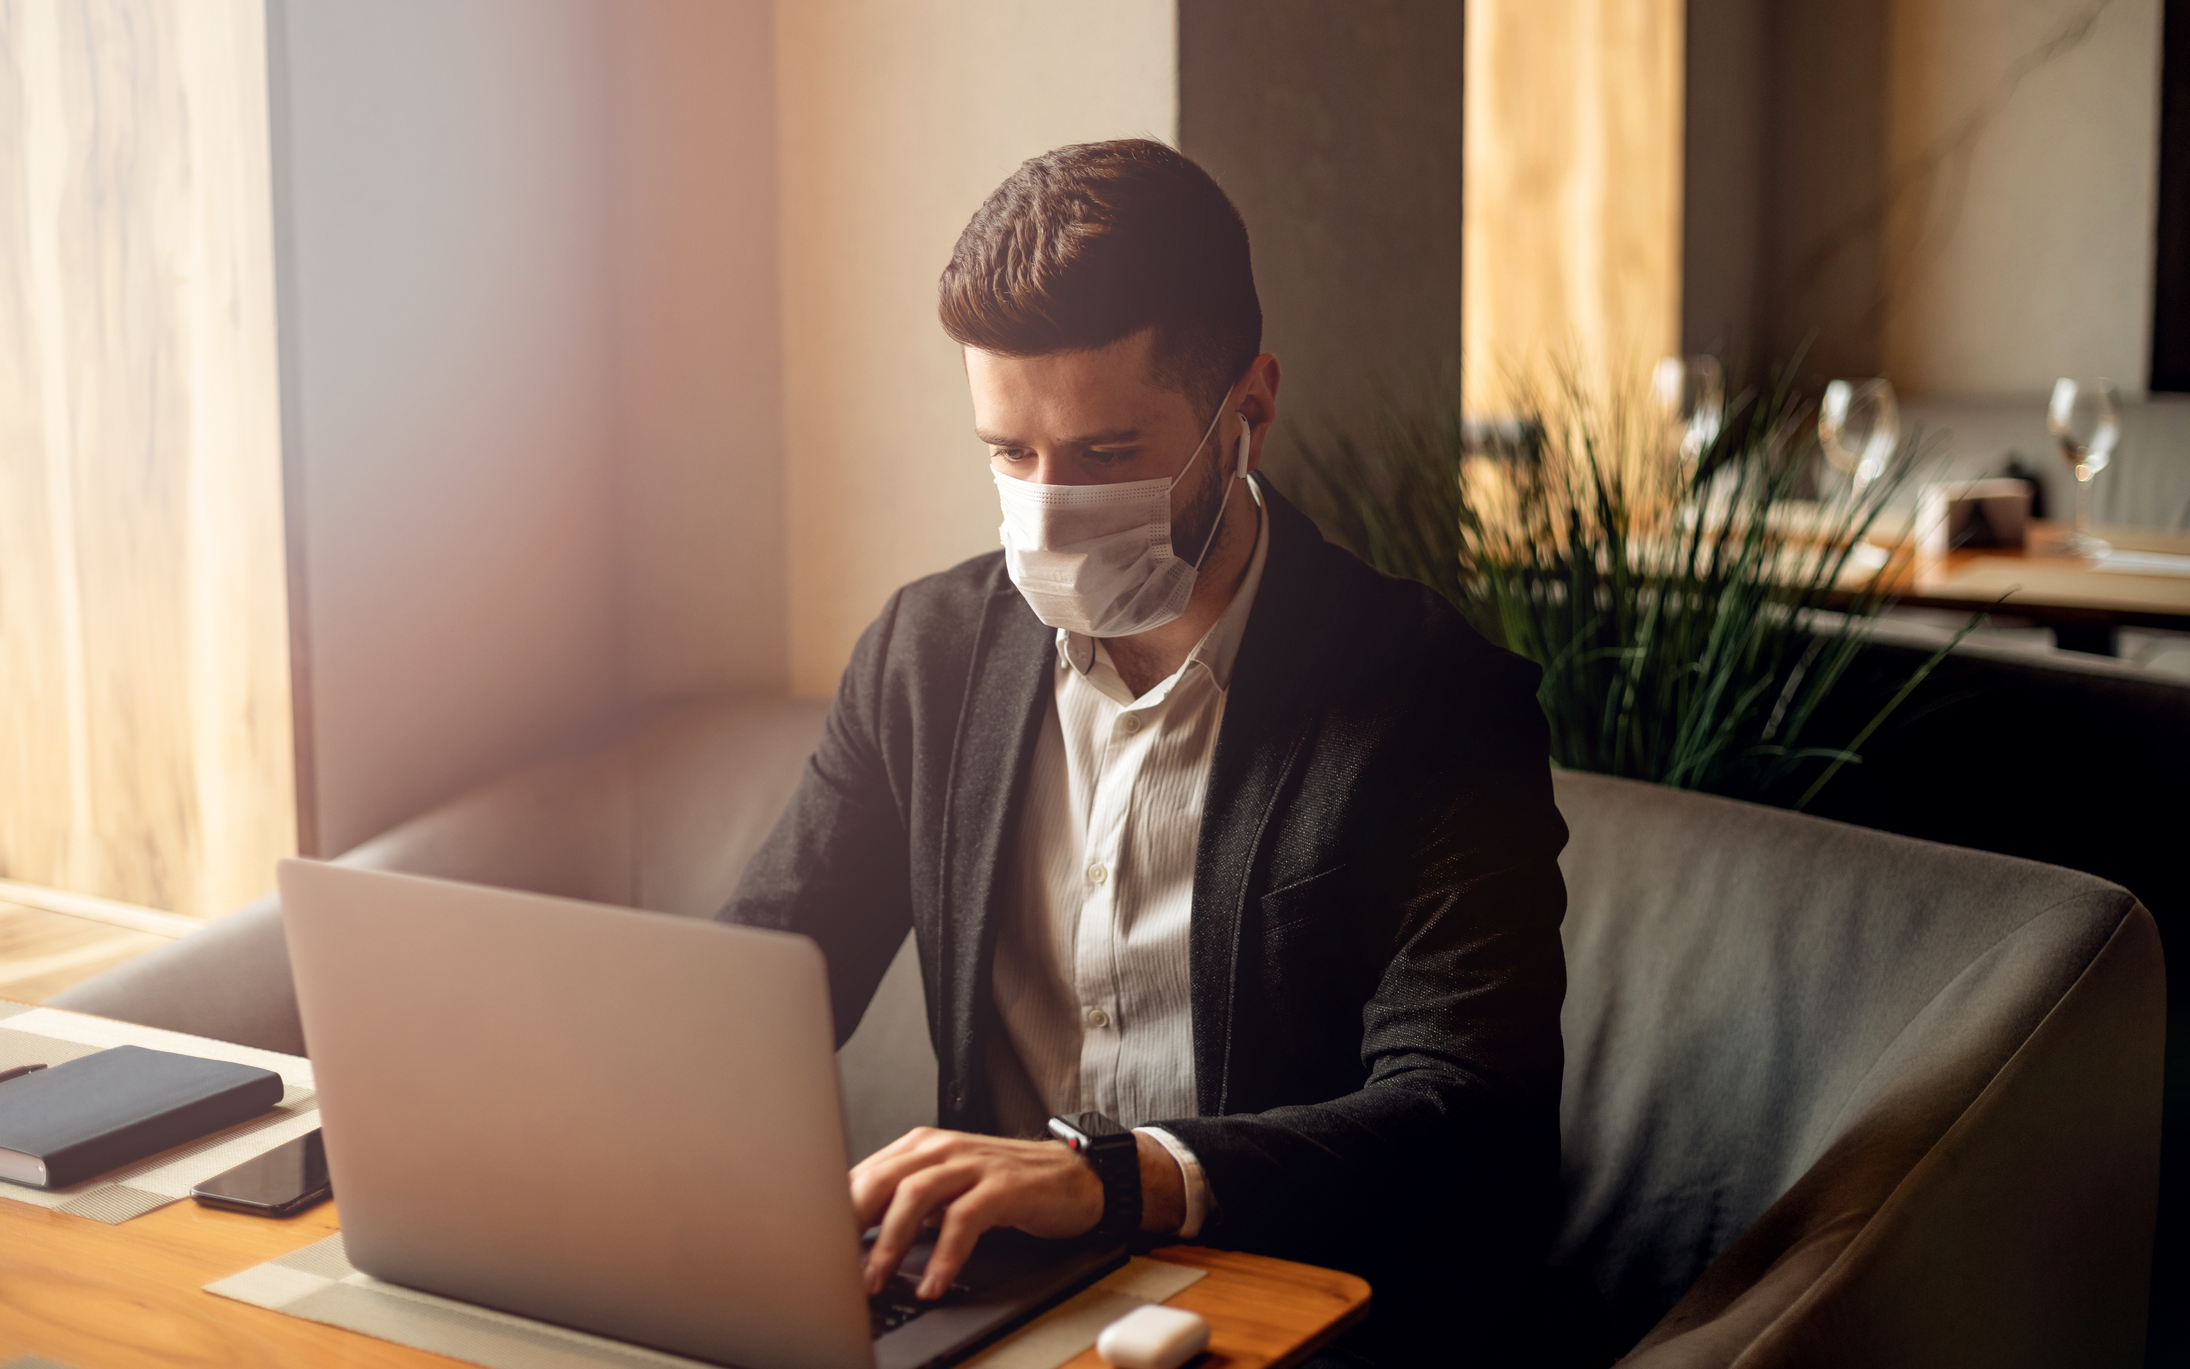 Our top 5 tips to keep on Marketing during the Covid-19 virus Pandemic